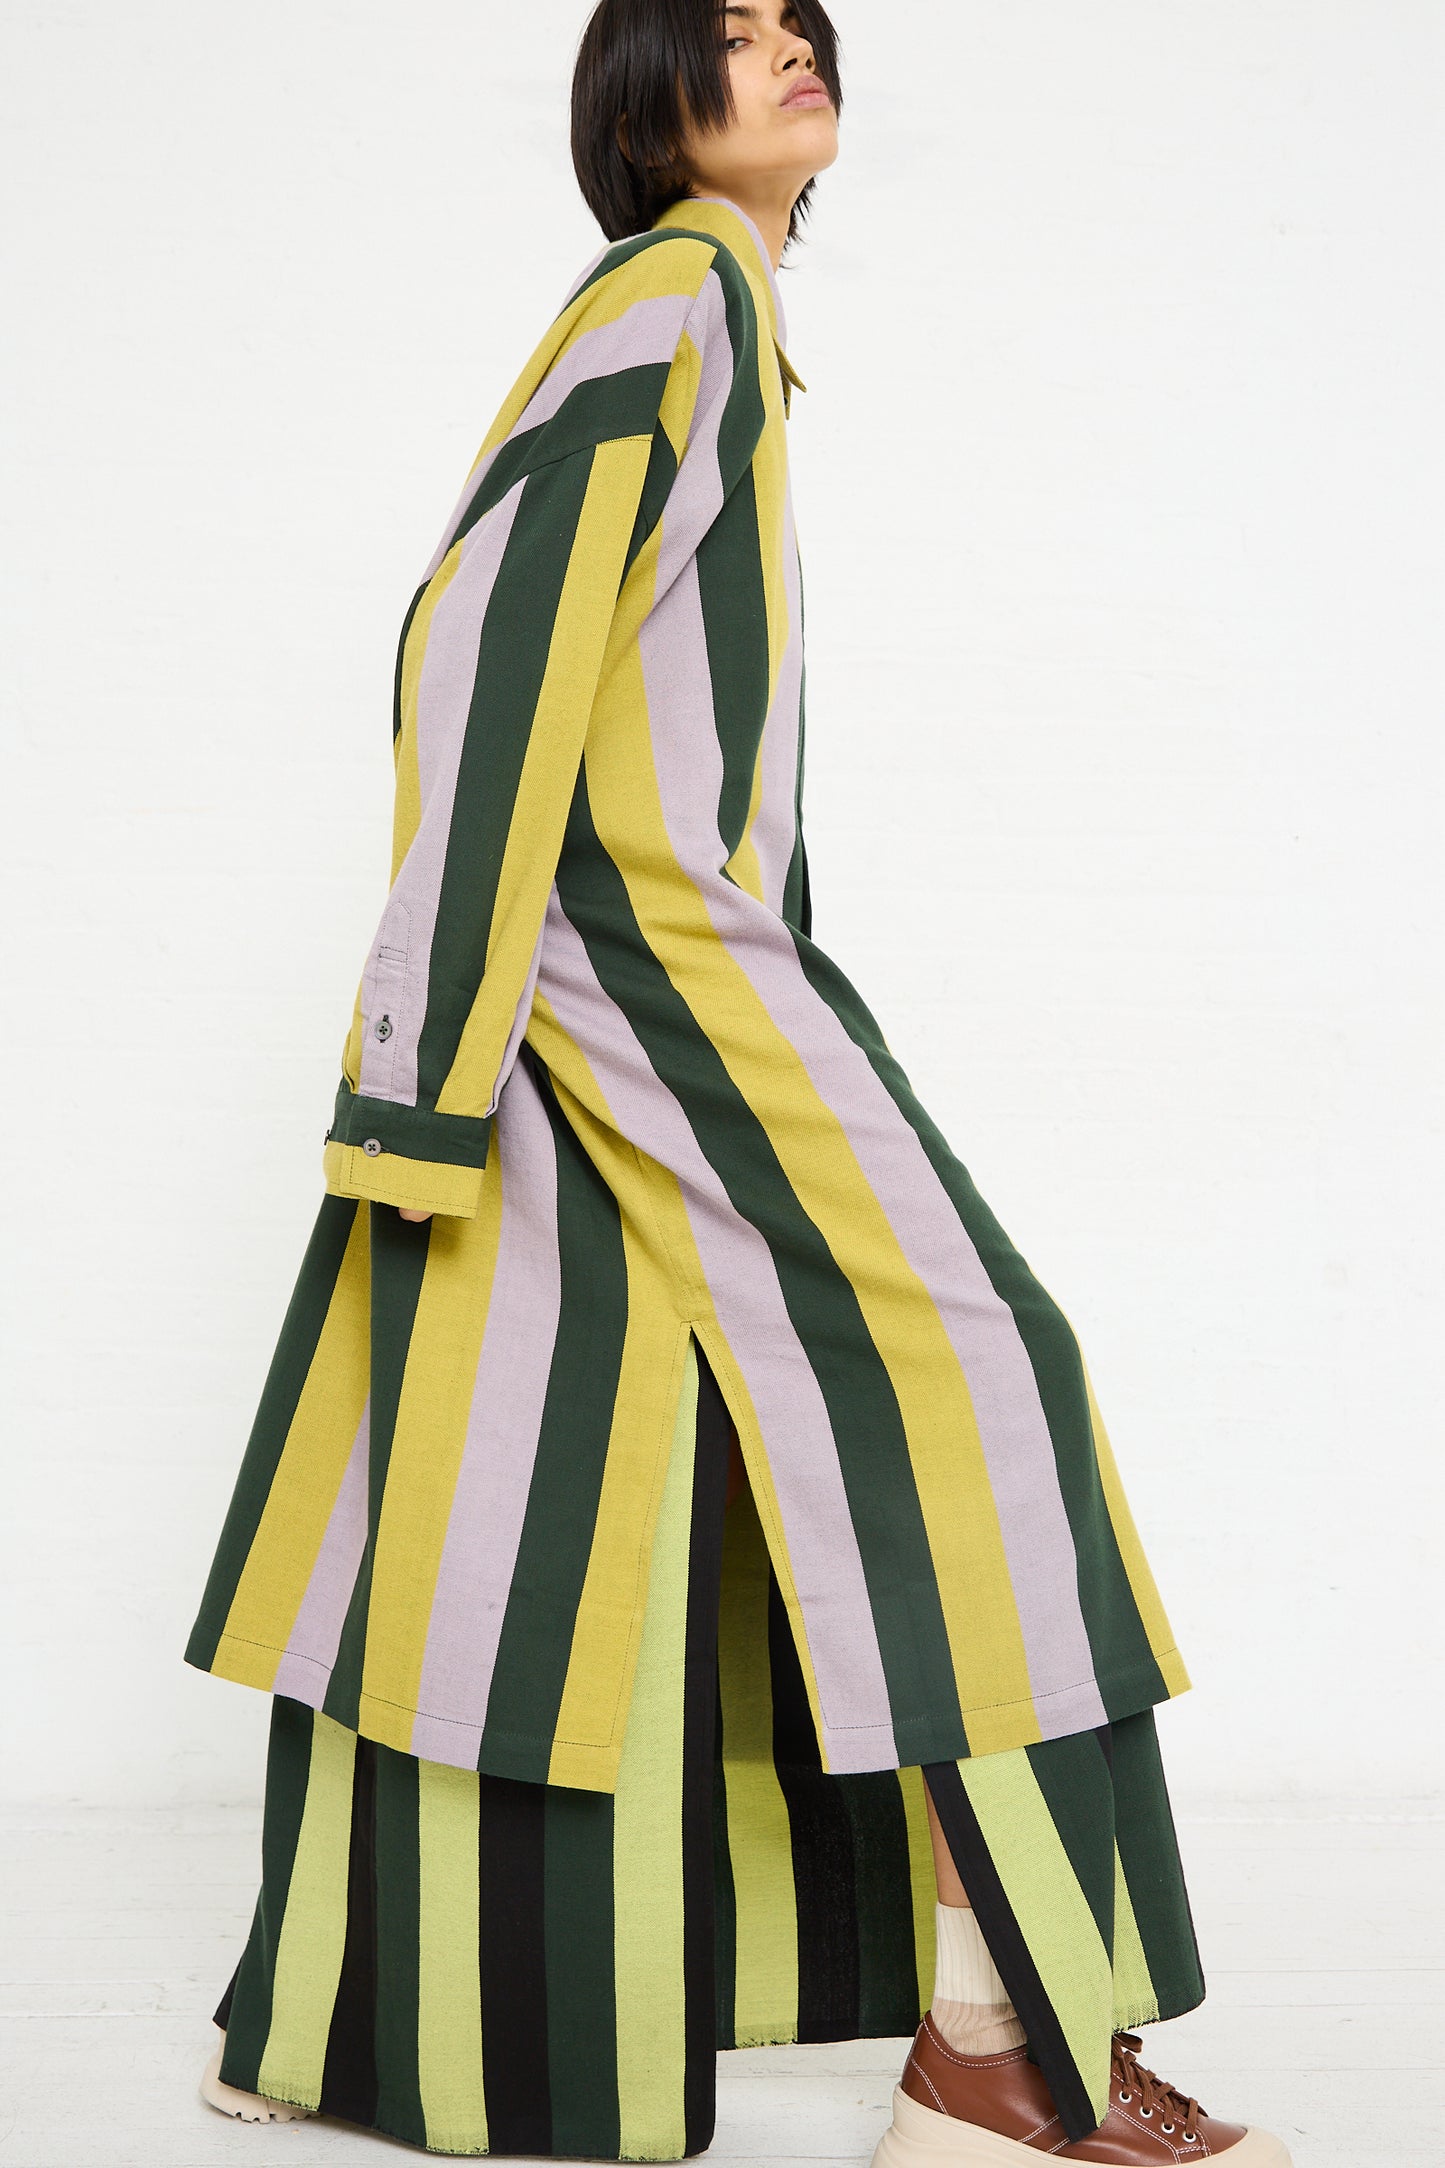 A woman in a Marrakshi Life Small Collar Oversized Shirt in Stripe, embracing traditional Moroccan wardrobe aesthetics with green, yellow, and black stripes, standing in profile against a white background.